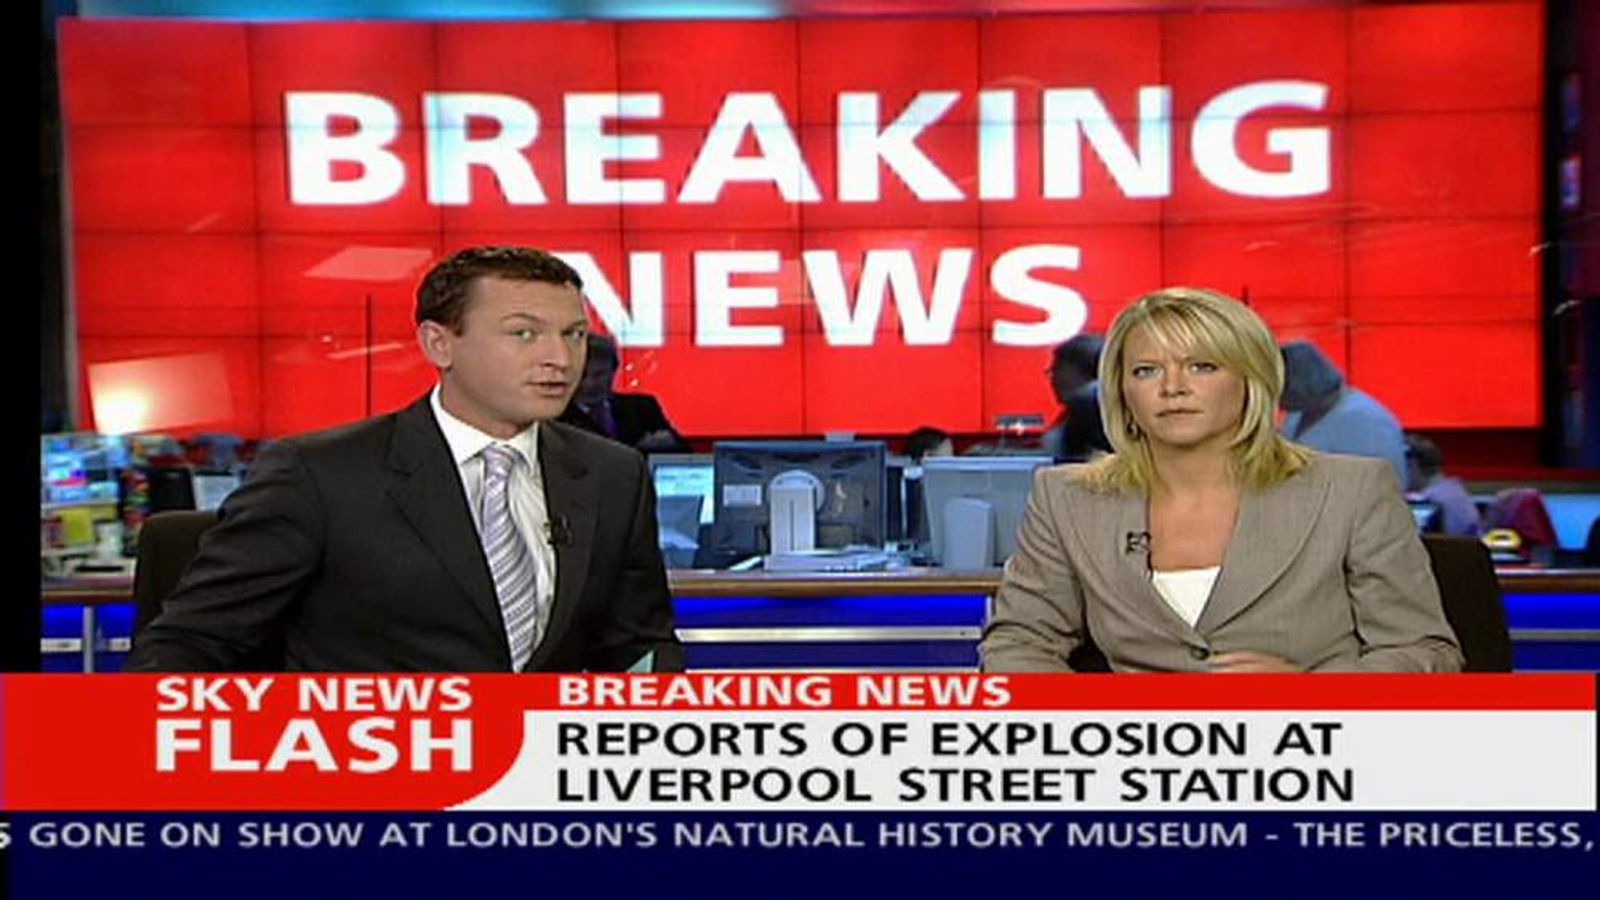 Sky News Coverage From 7 July 2005 | Scoop News | Sky News